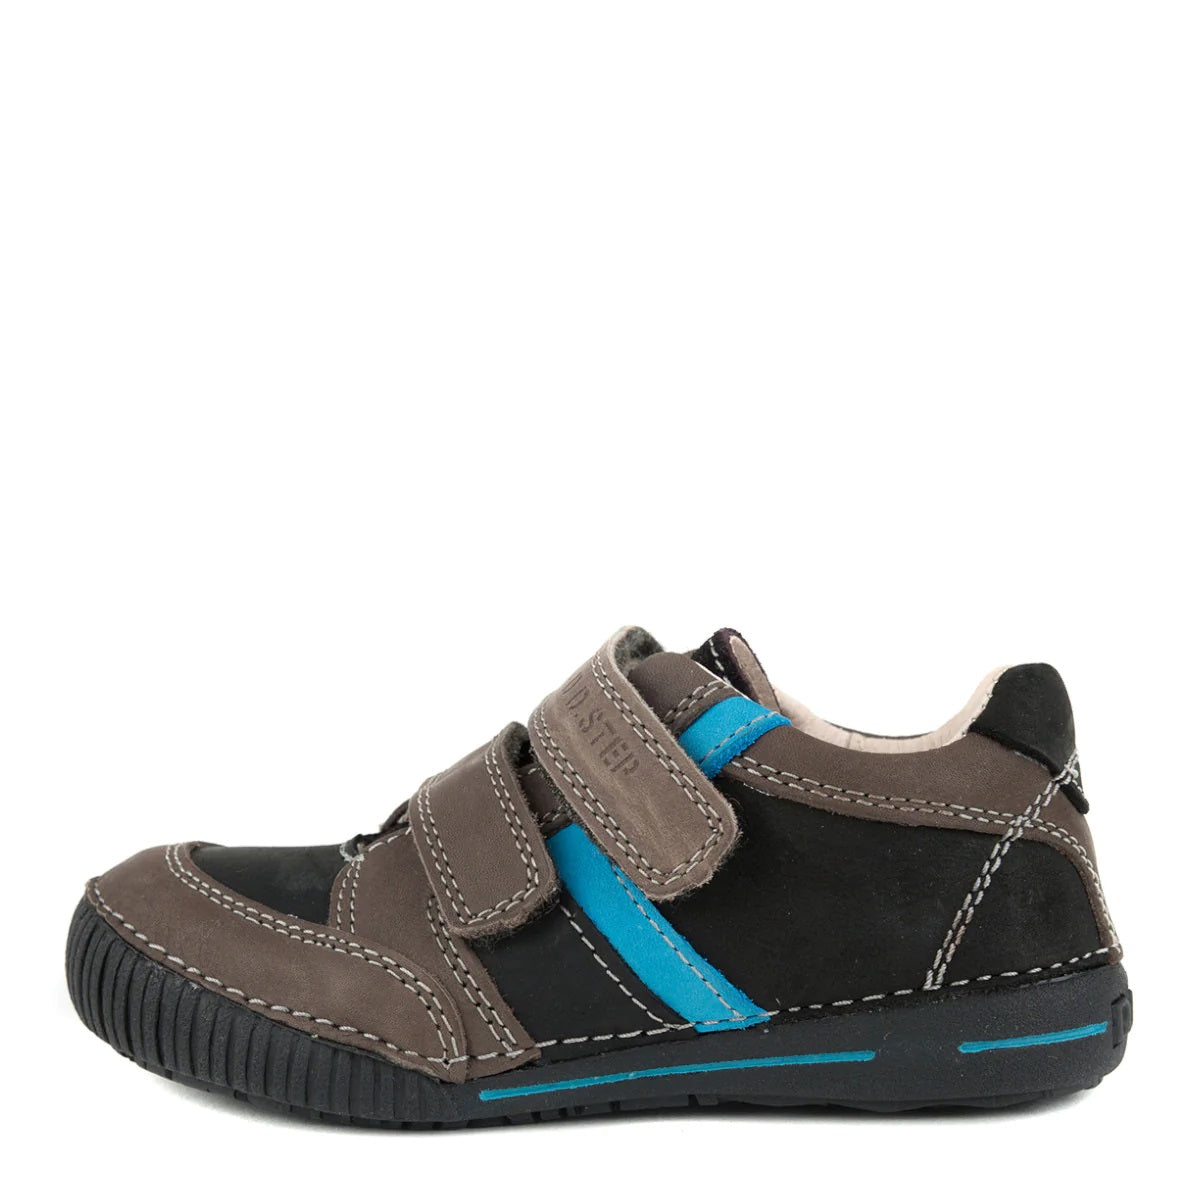 D.D. Step Little Kid Boy Shoes Black And Brown - Supportive Leather From Europe Kids Orthopedic - shoekid.ca